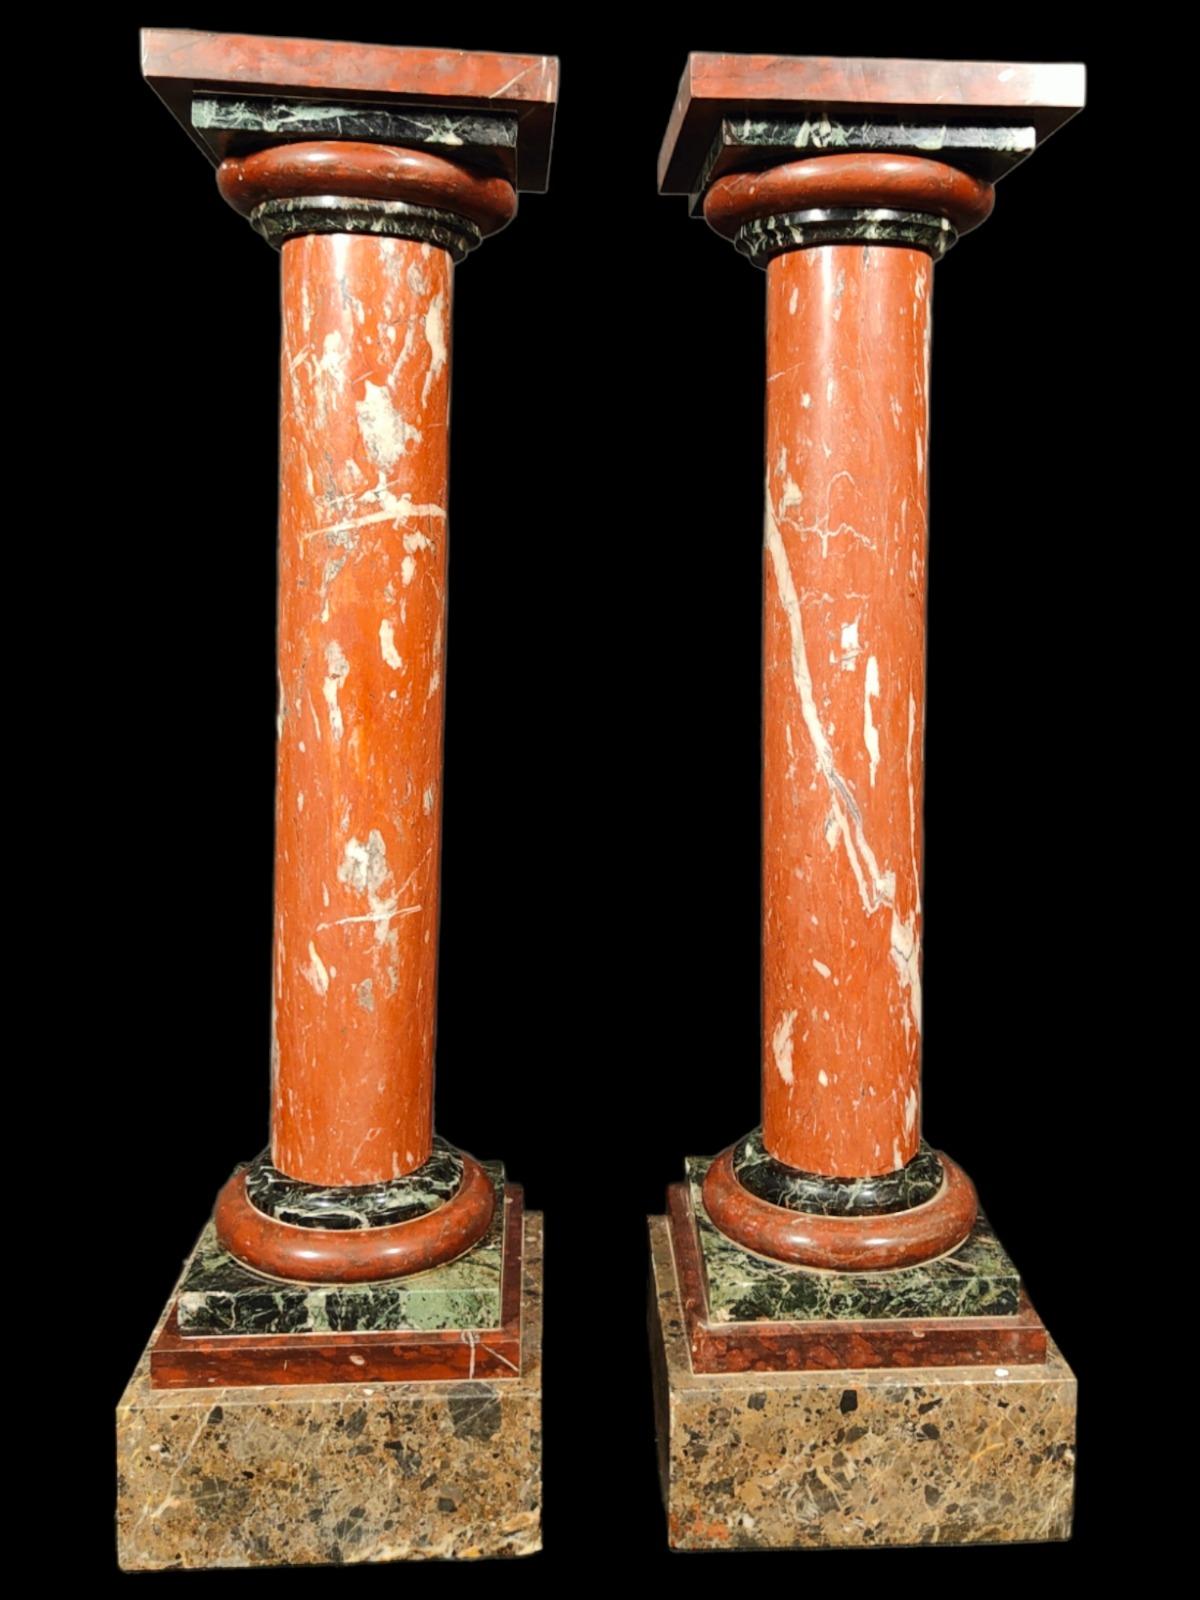 Pair of columns from the 19th century
ELEGANT OLD MARBLE COLUMNS FROM THE XIX CENTURY. THEY ARE COMPLETELY REMOVABLE-MEASURES: 105X27X27 CM
good condition.